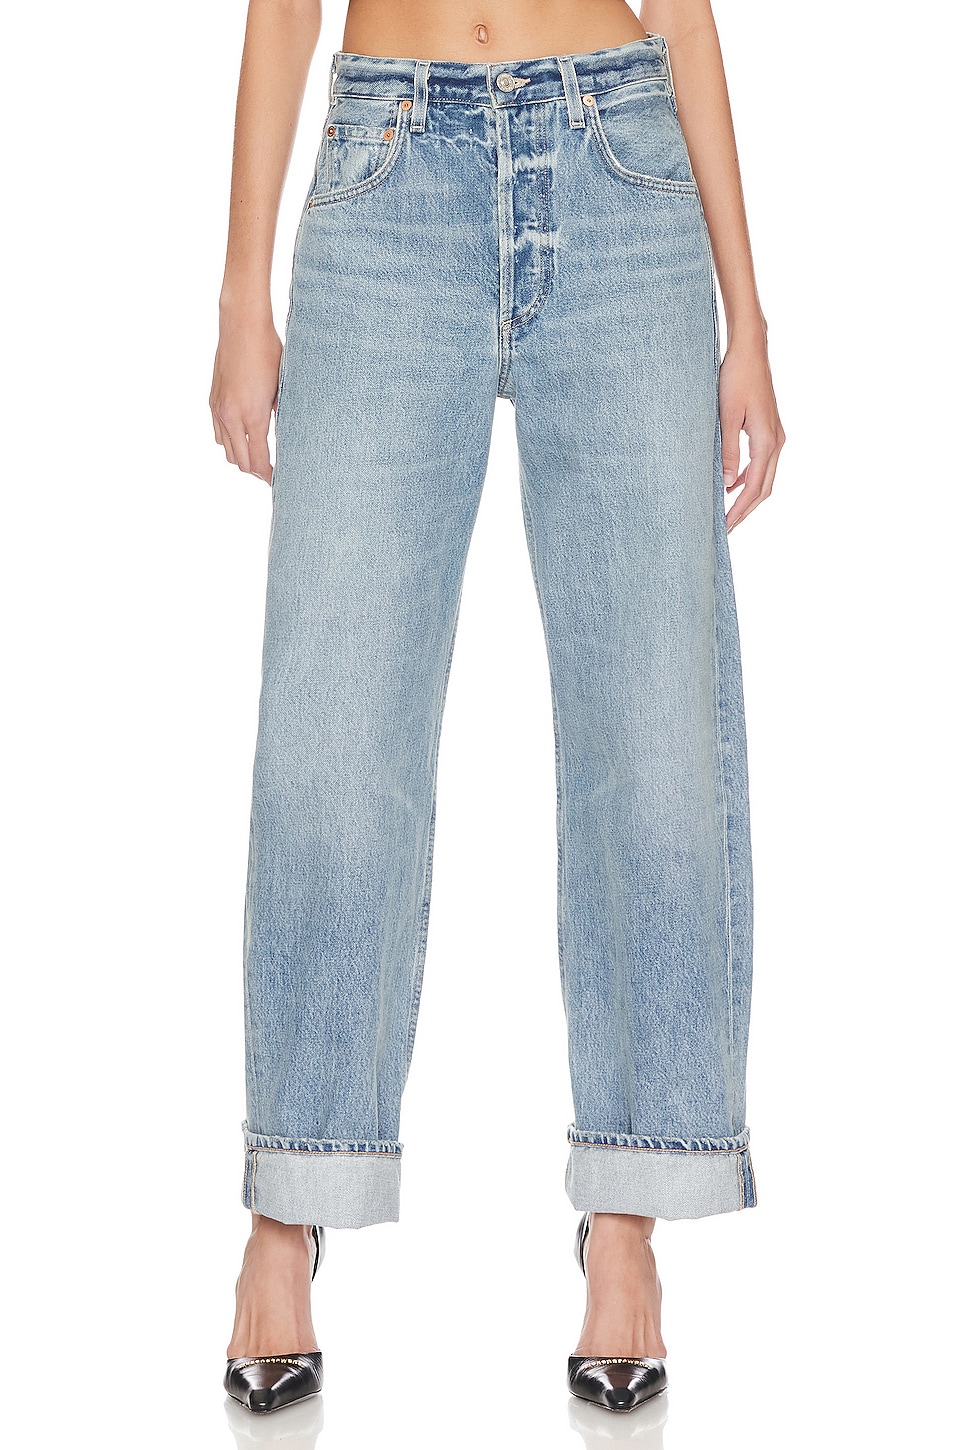 Citizens of Humanity Ayla Baggy Cuffed Crop in Skylights | REVOLVE